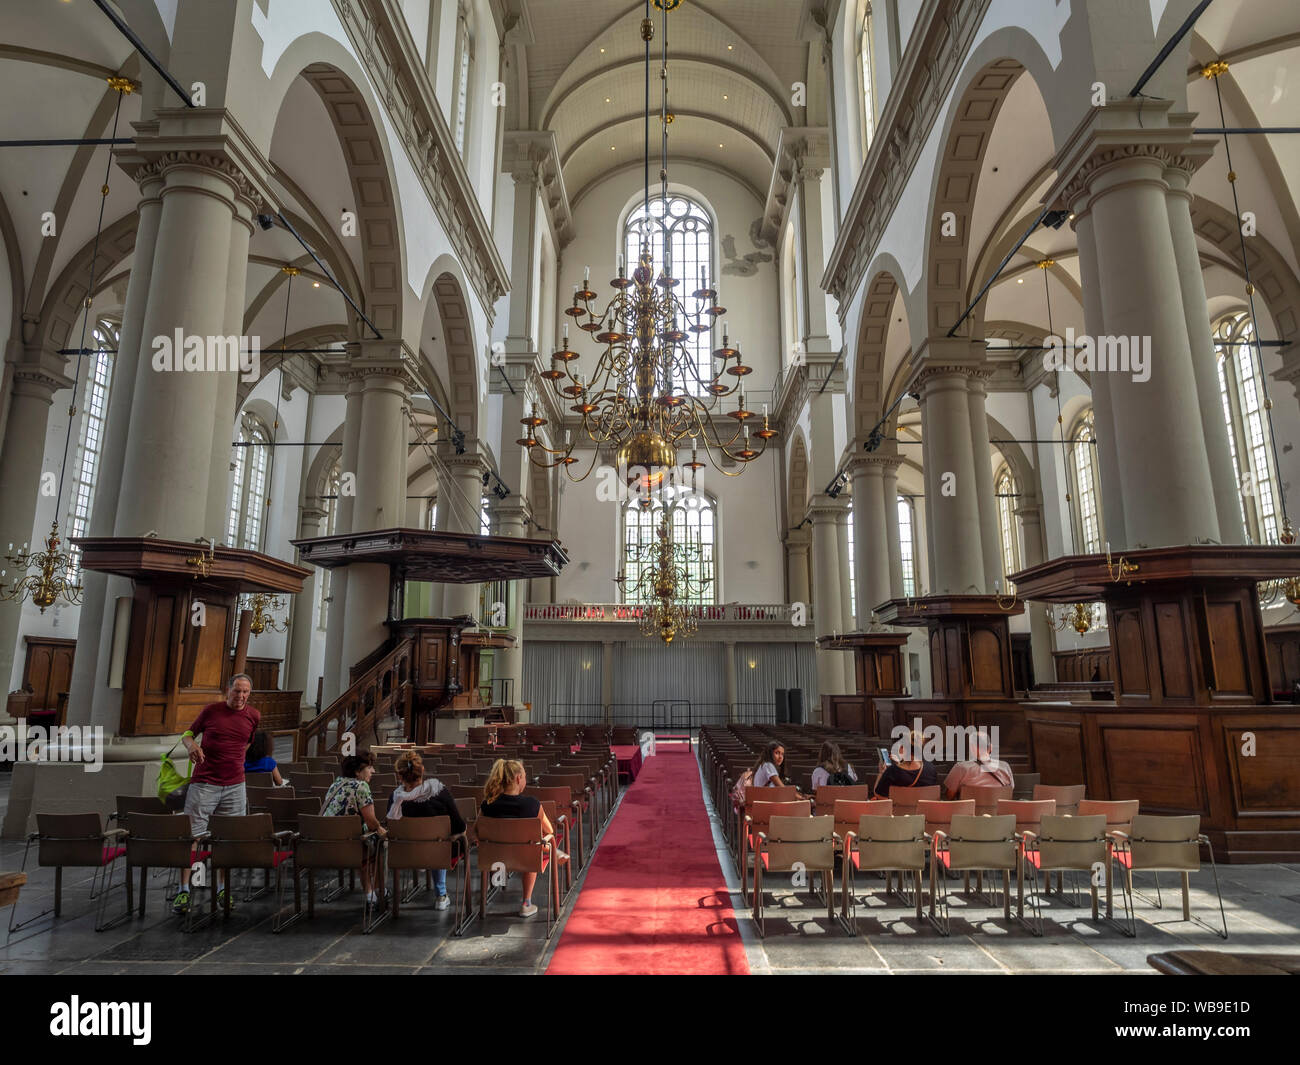 Amsterdam, Netherlands - July 18, 2018: Interior of the Westerkirk in Amsterdam. The Westerkirk is one of the most prominent churches in all of Amster Stock Photo